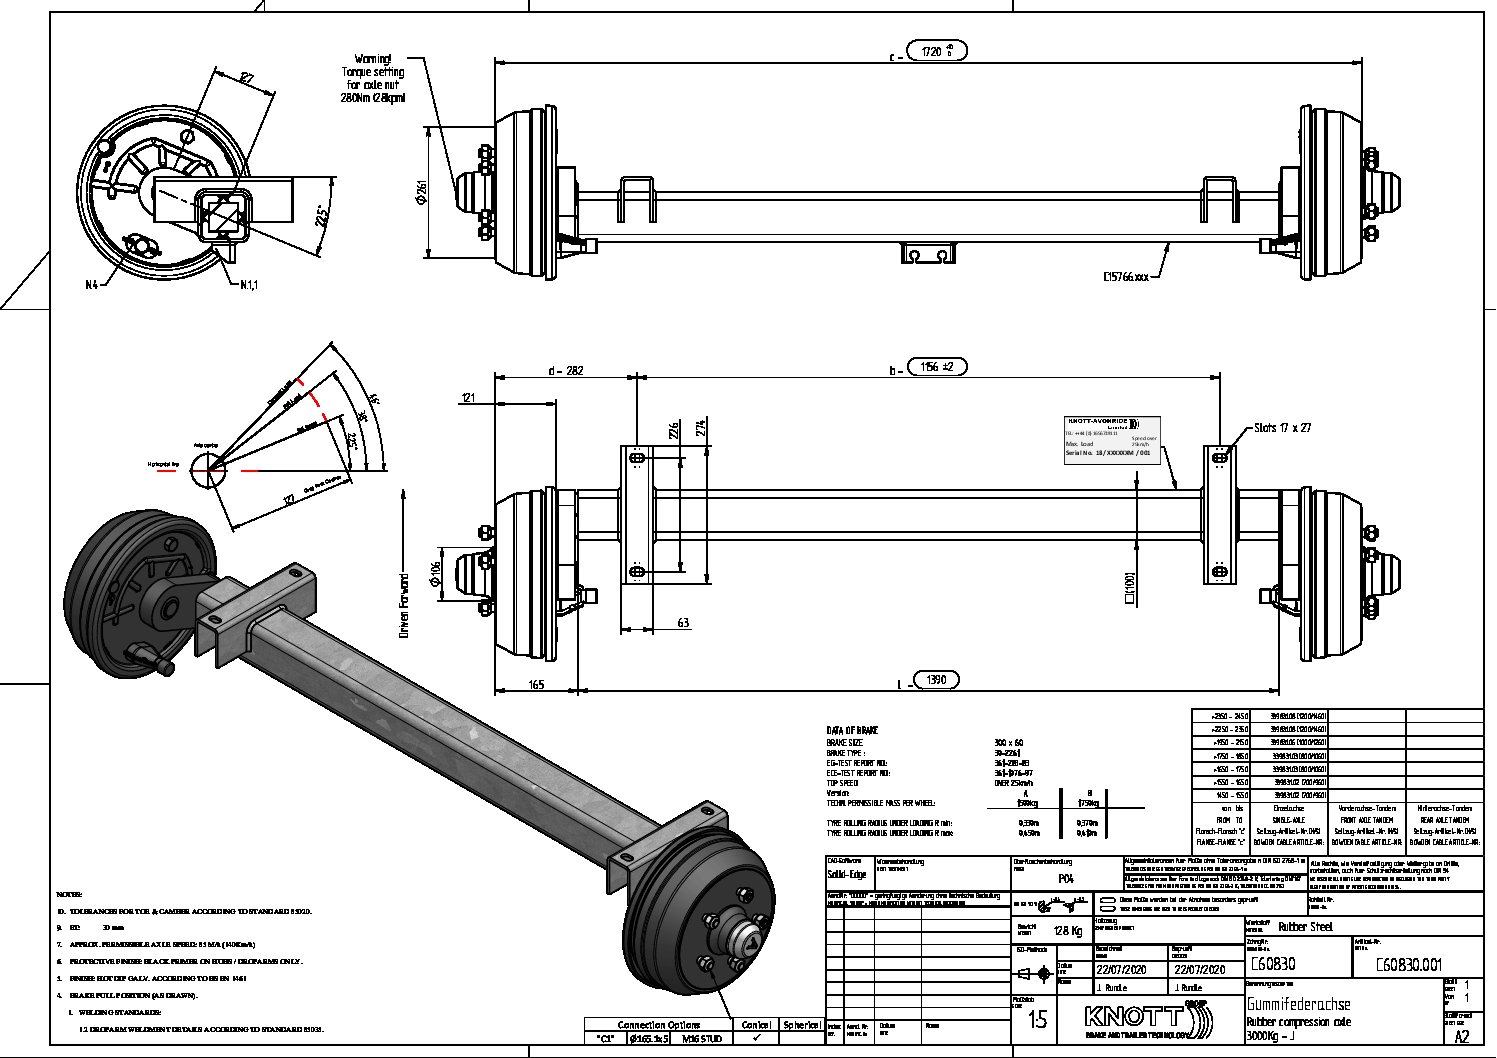 Trailer Axle's And Brake's (Parts)